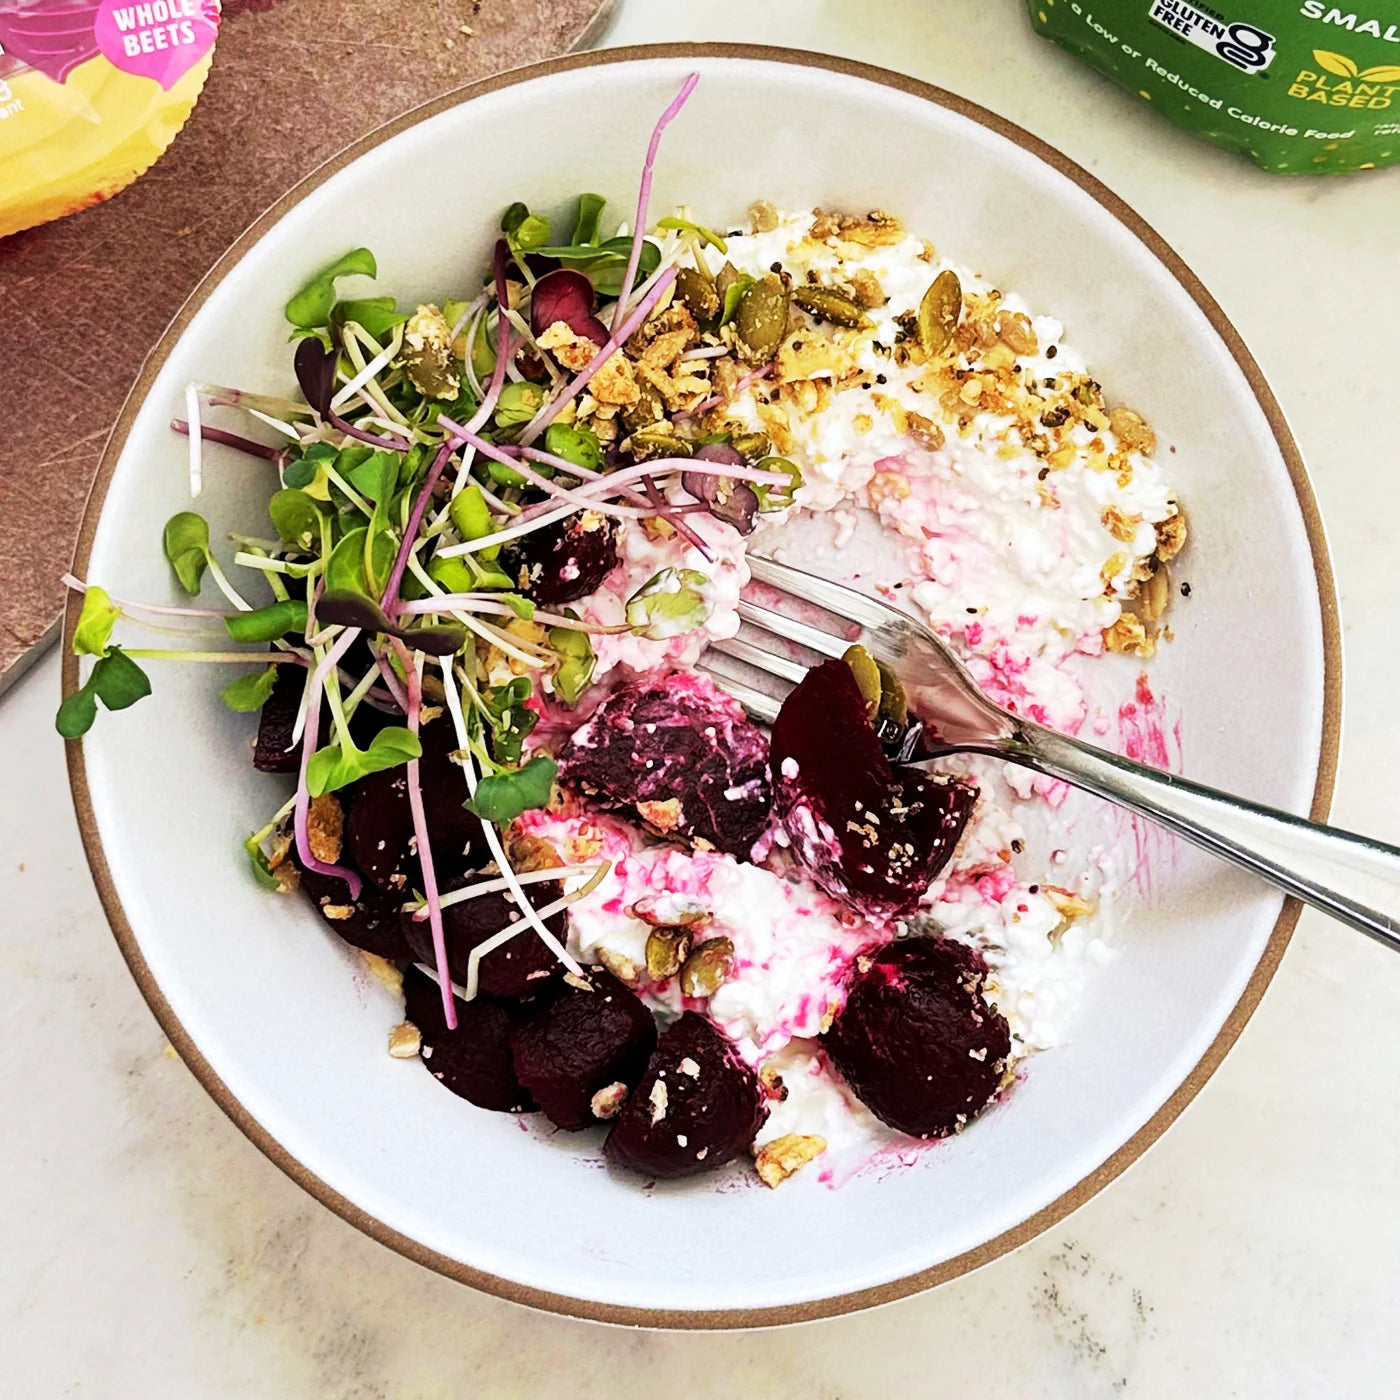 Pickled beets and cottage cheese in a bowl with microgreens and Struesli Savory + Seed